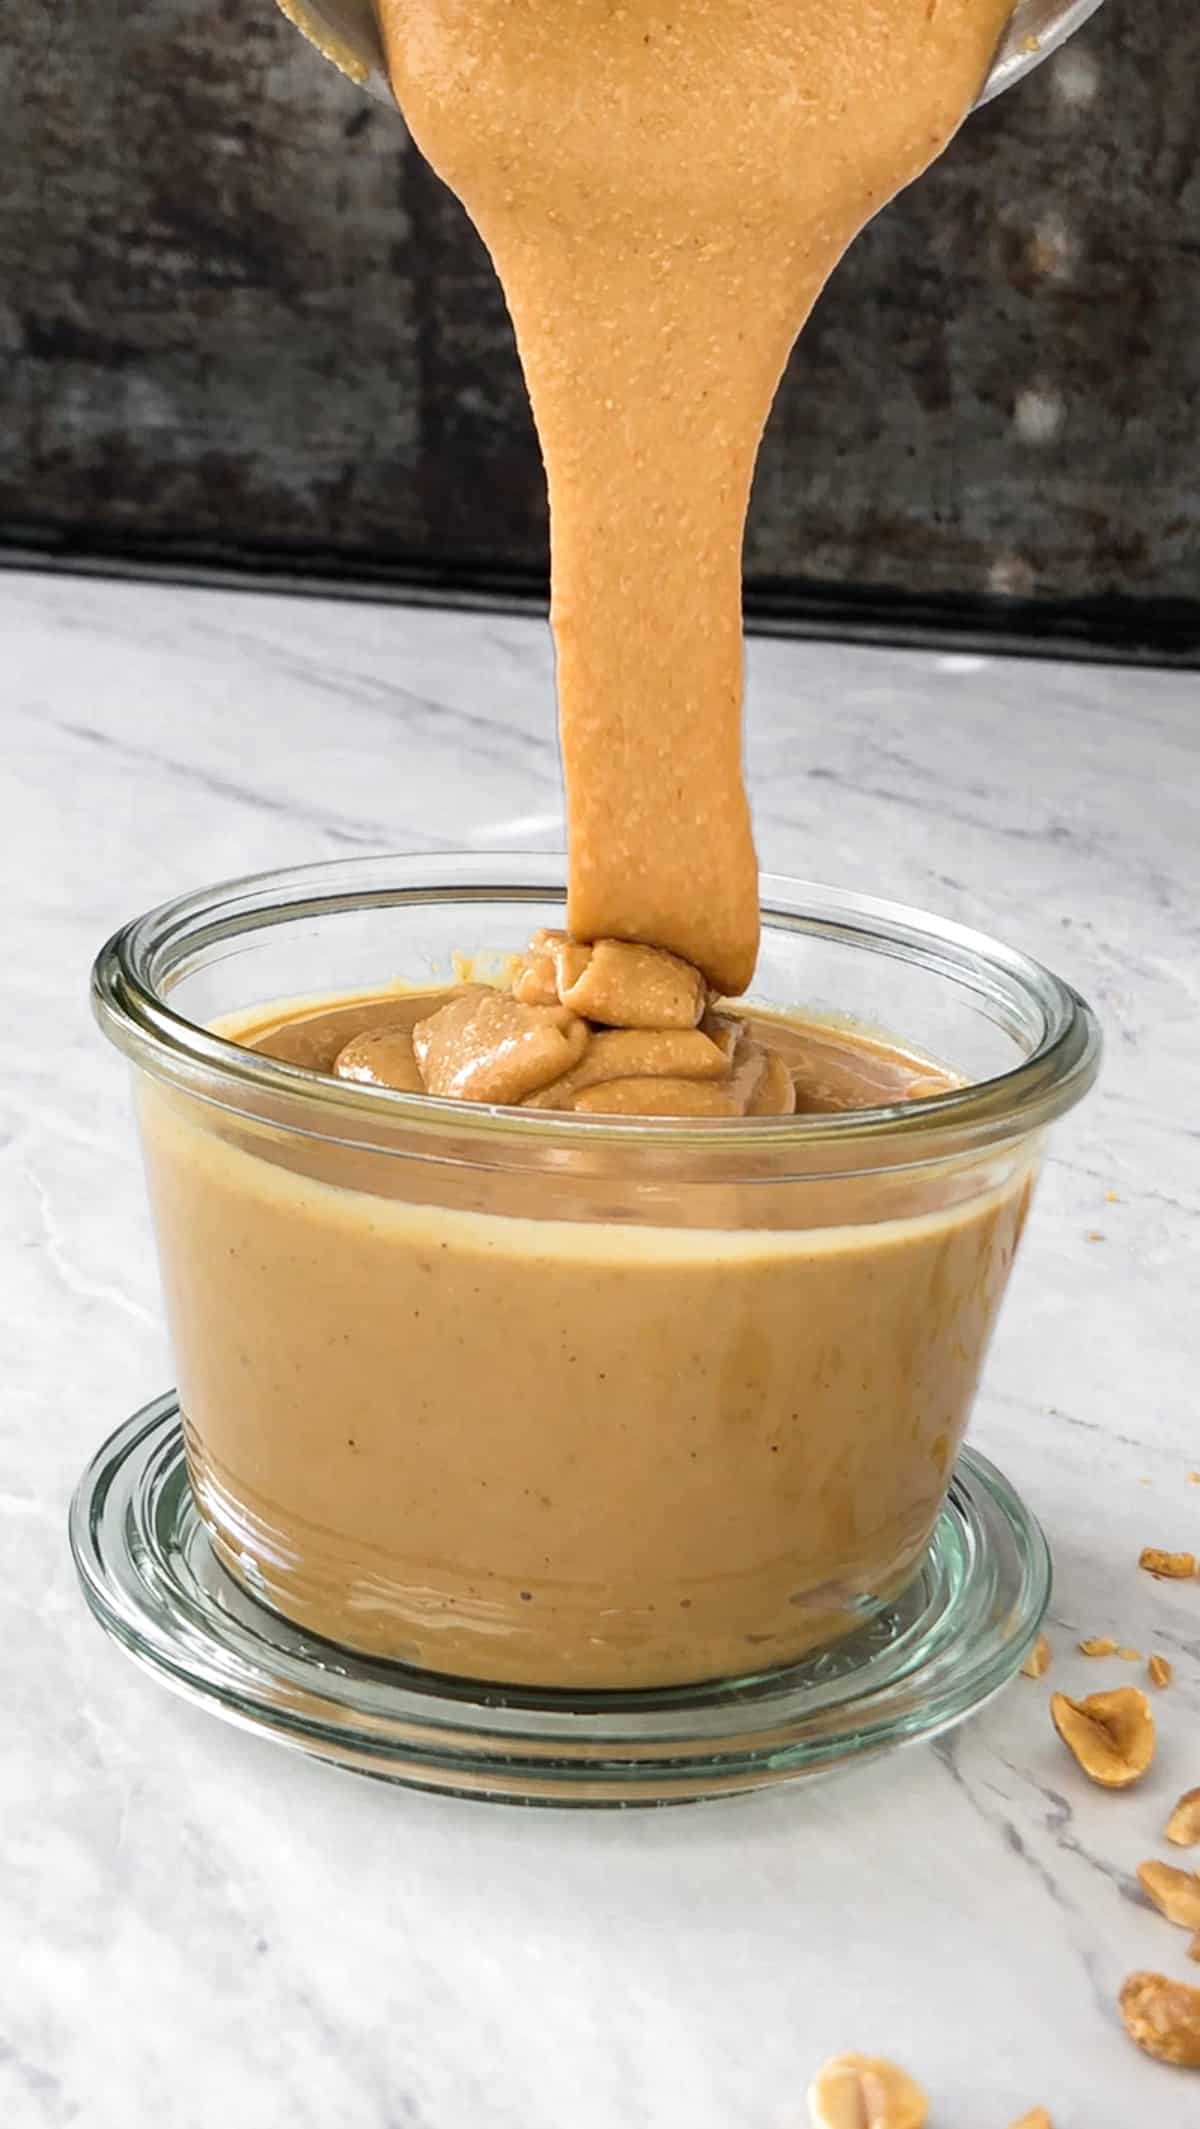 Homemade peanut butter being poured in a jar.